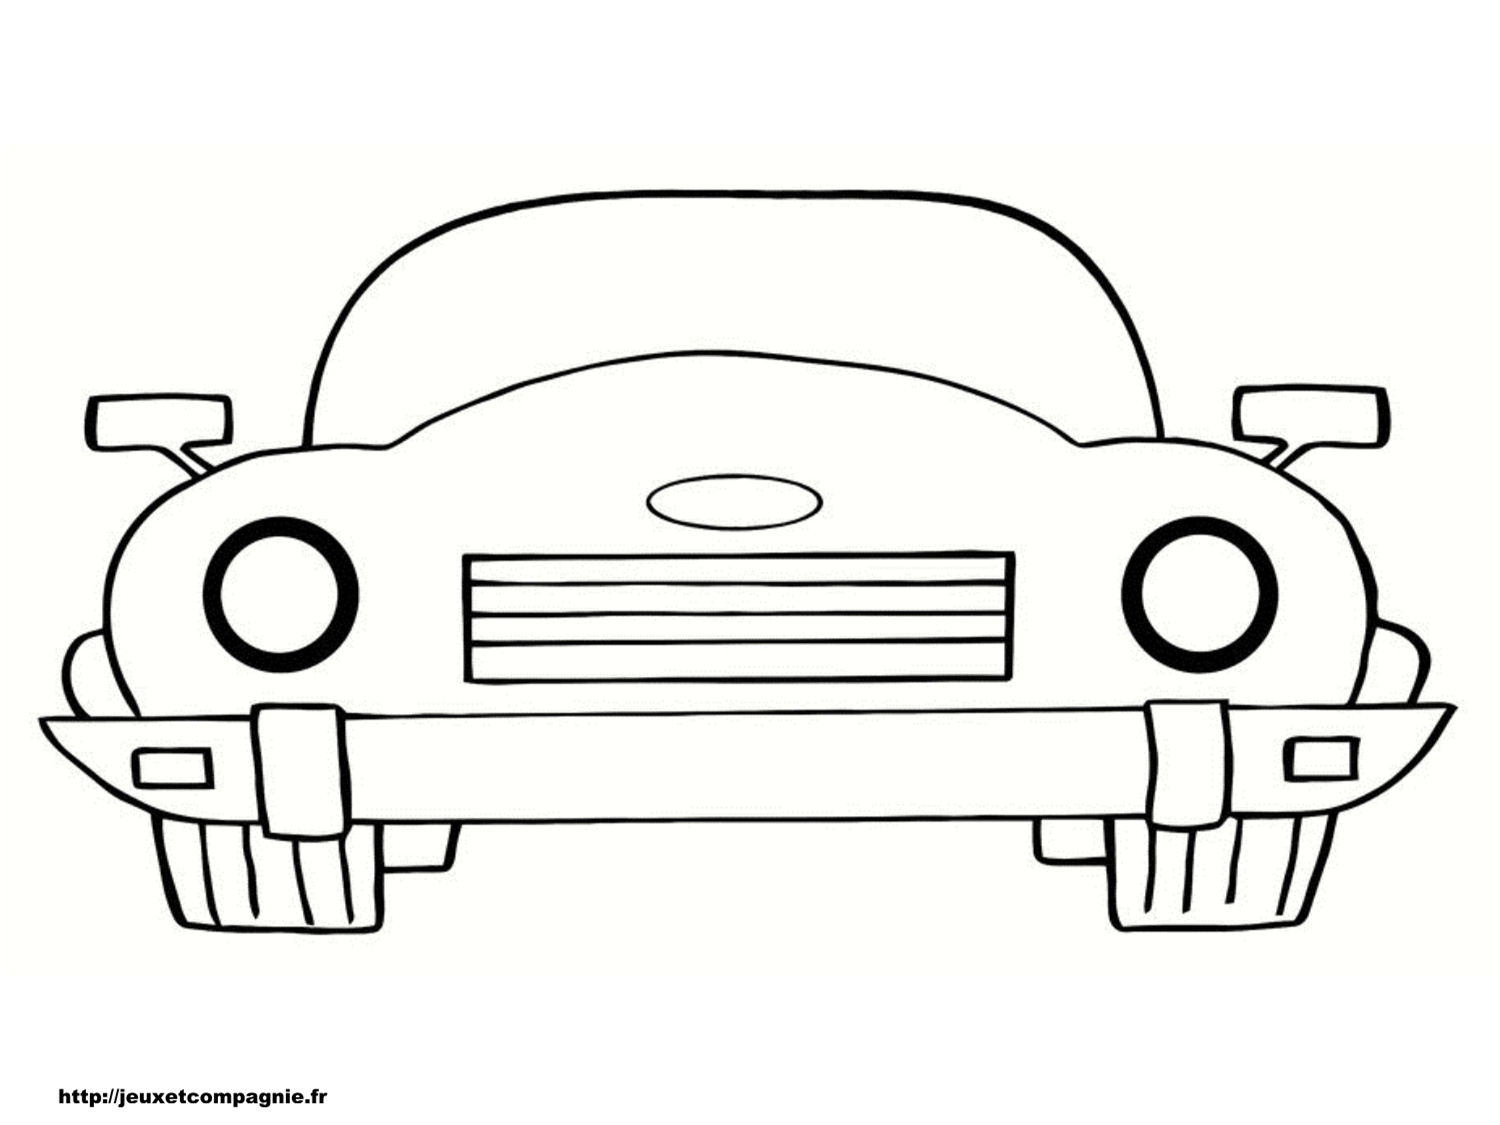 12 Génial Coloriage Voiture Fast And Furious Stock - Coloriage serapportantà Coloriahe Voiture Fast And Furious